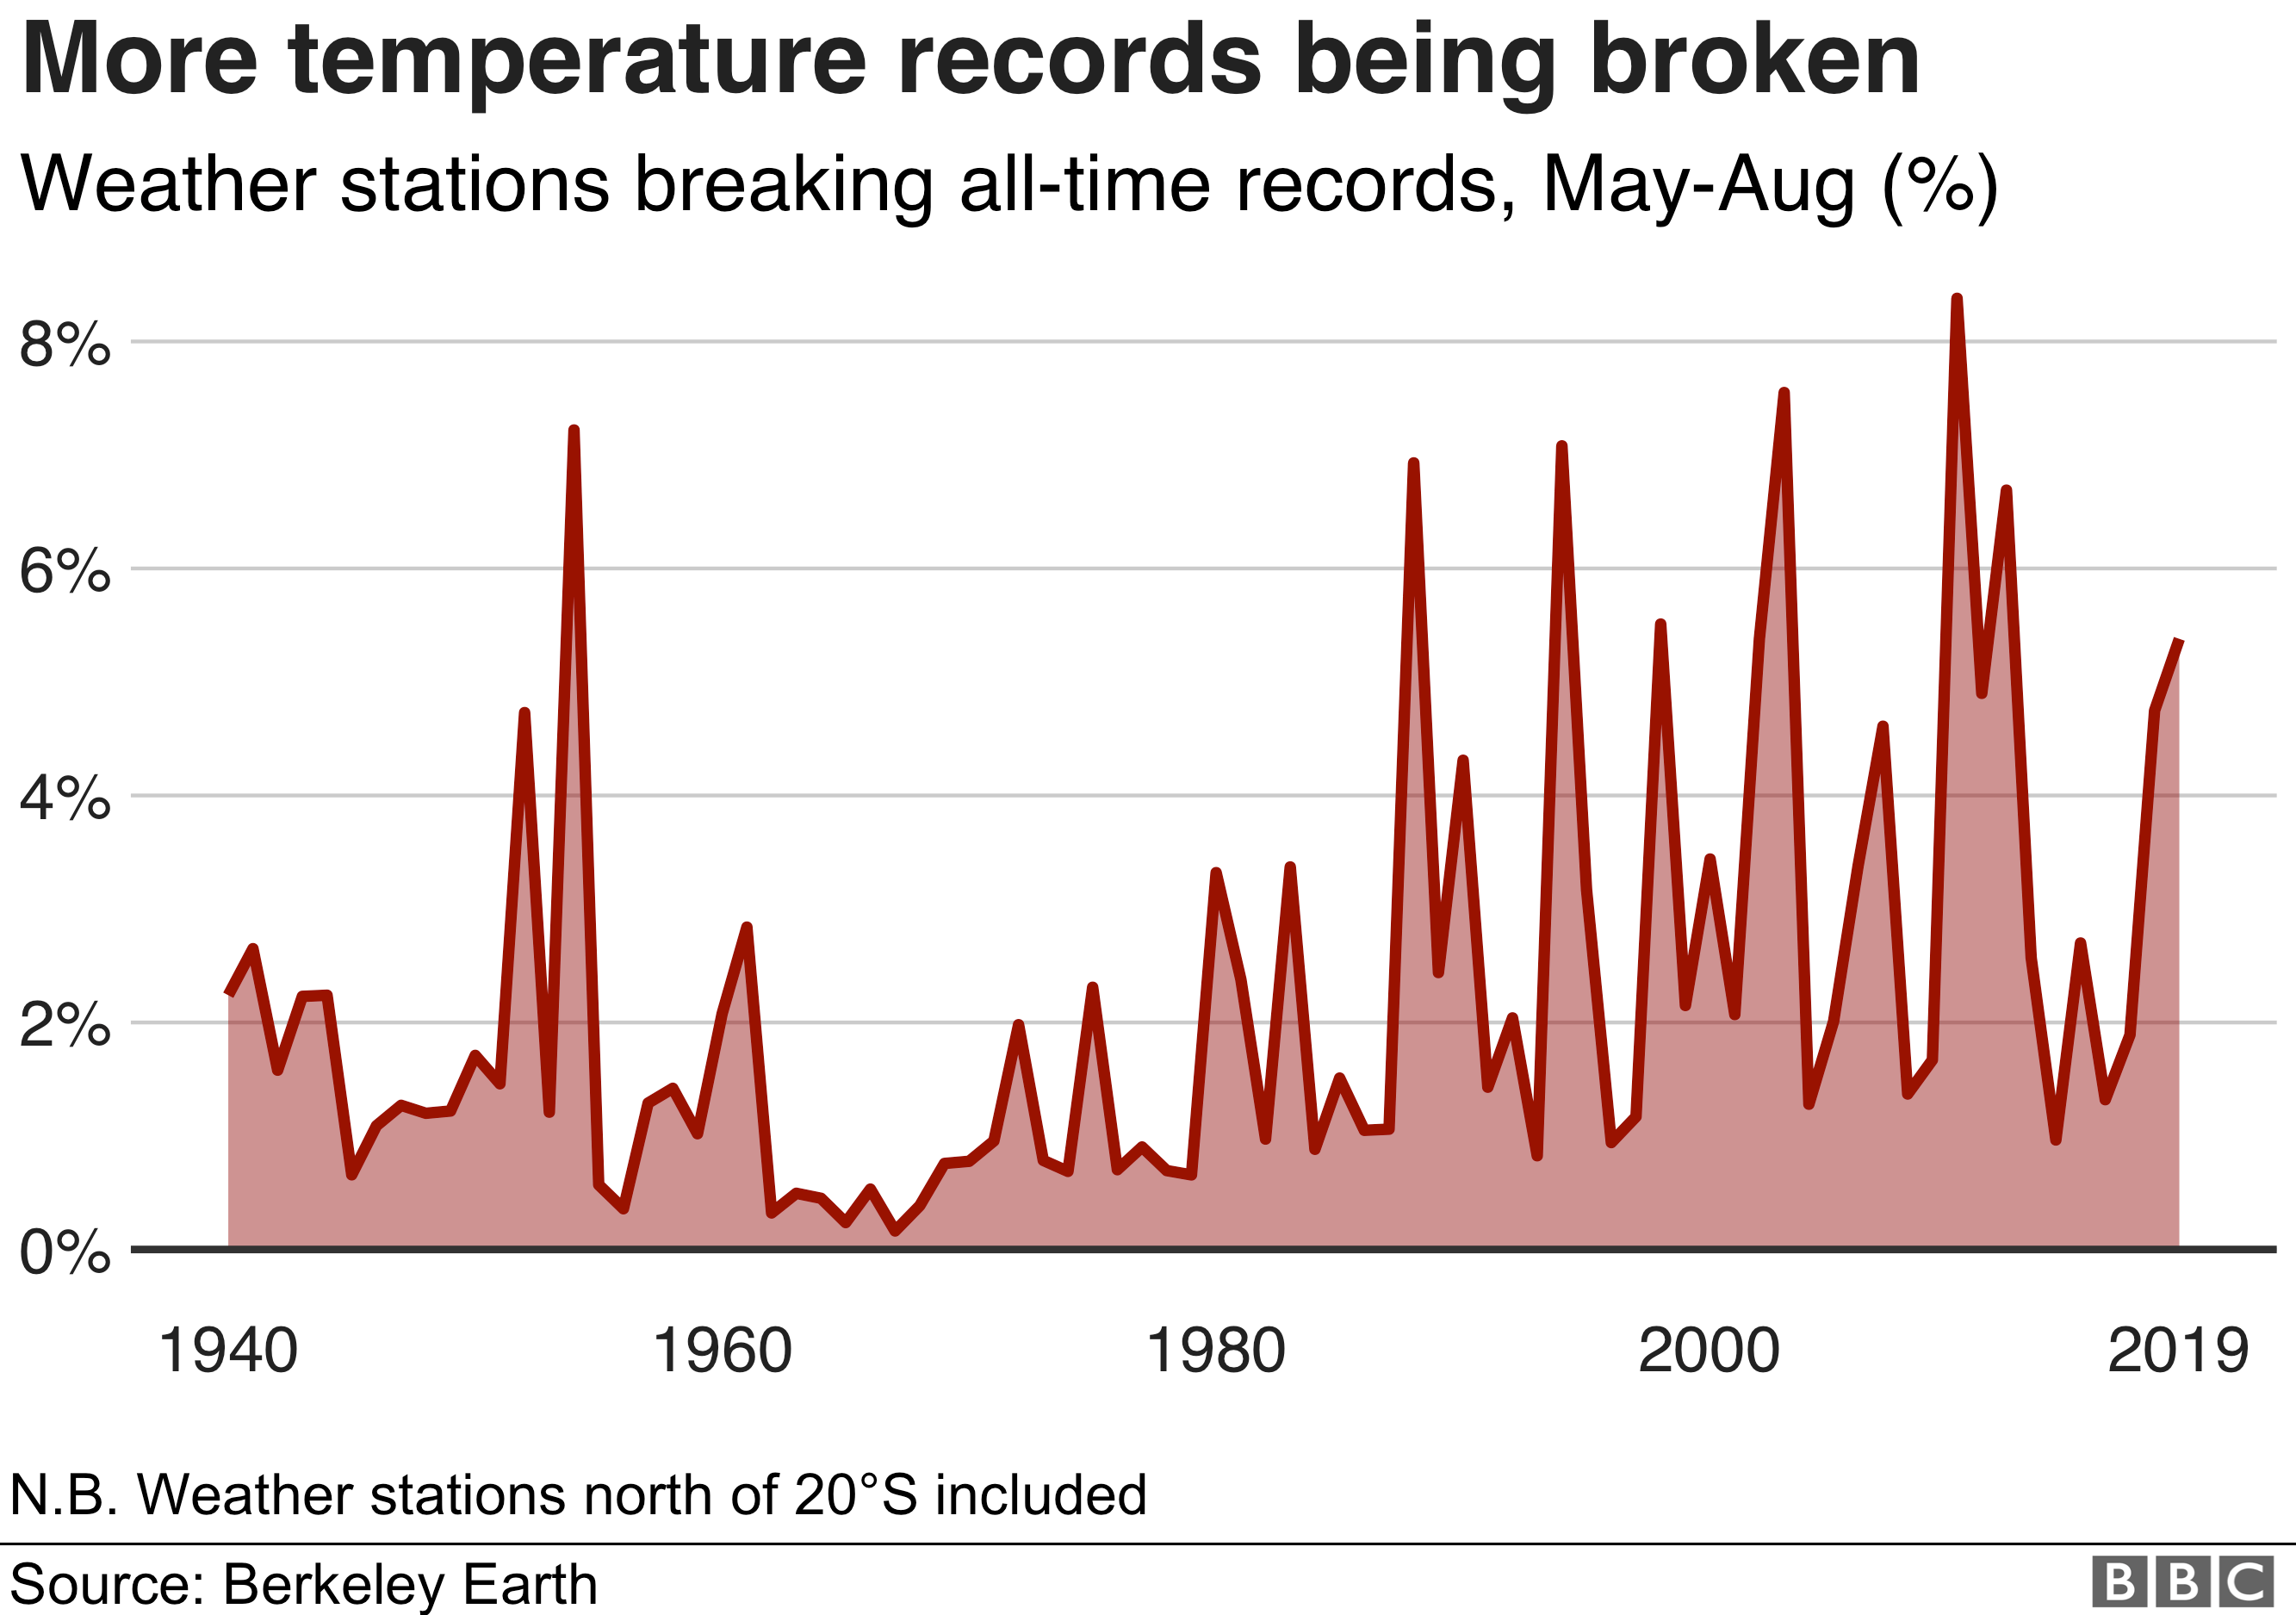 Chart showing that the number of all-time temperature records broken has been increasing